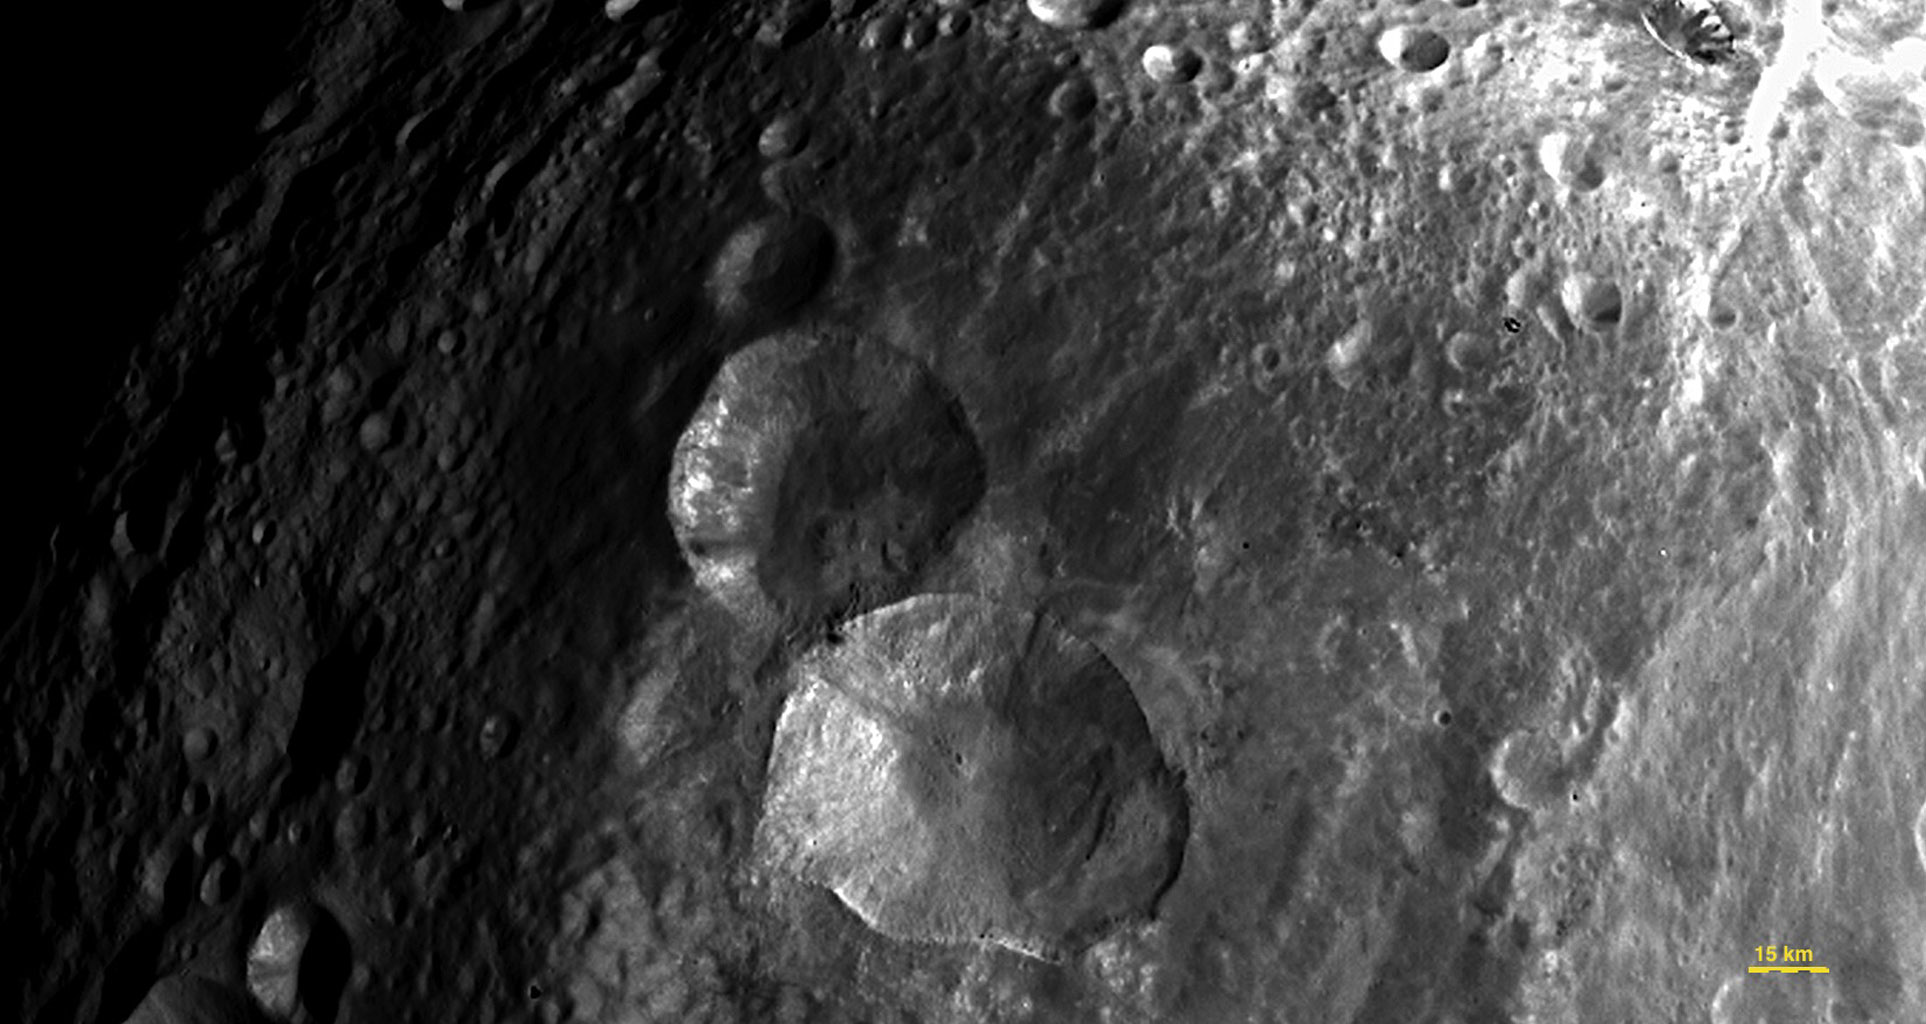 Close-up View of 'Snowman' Craters